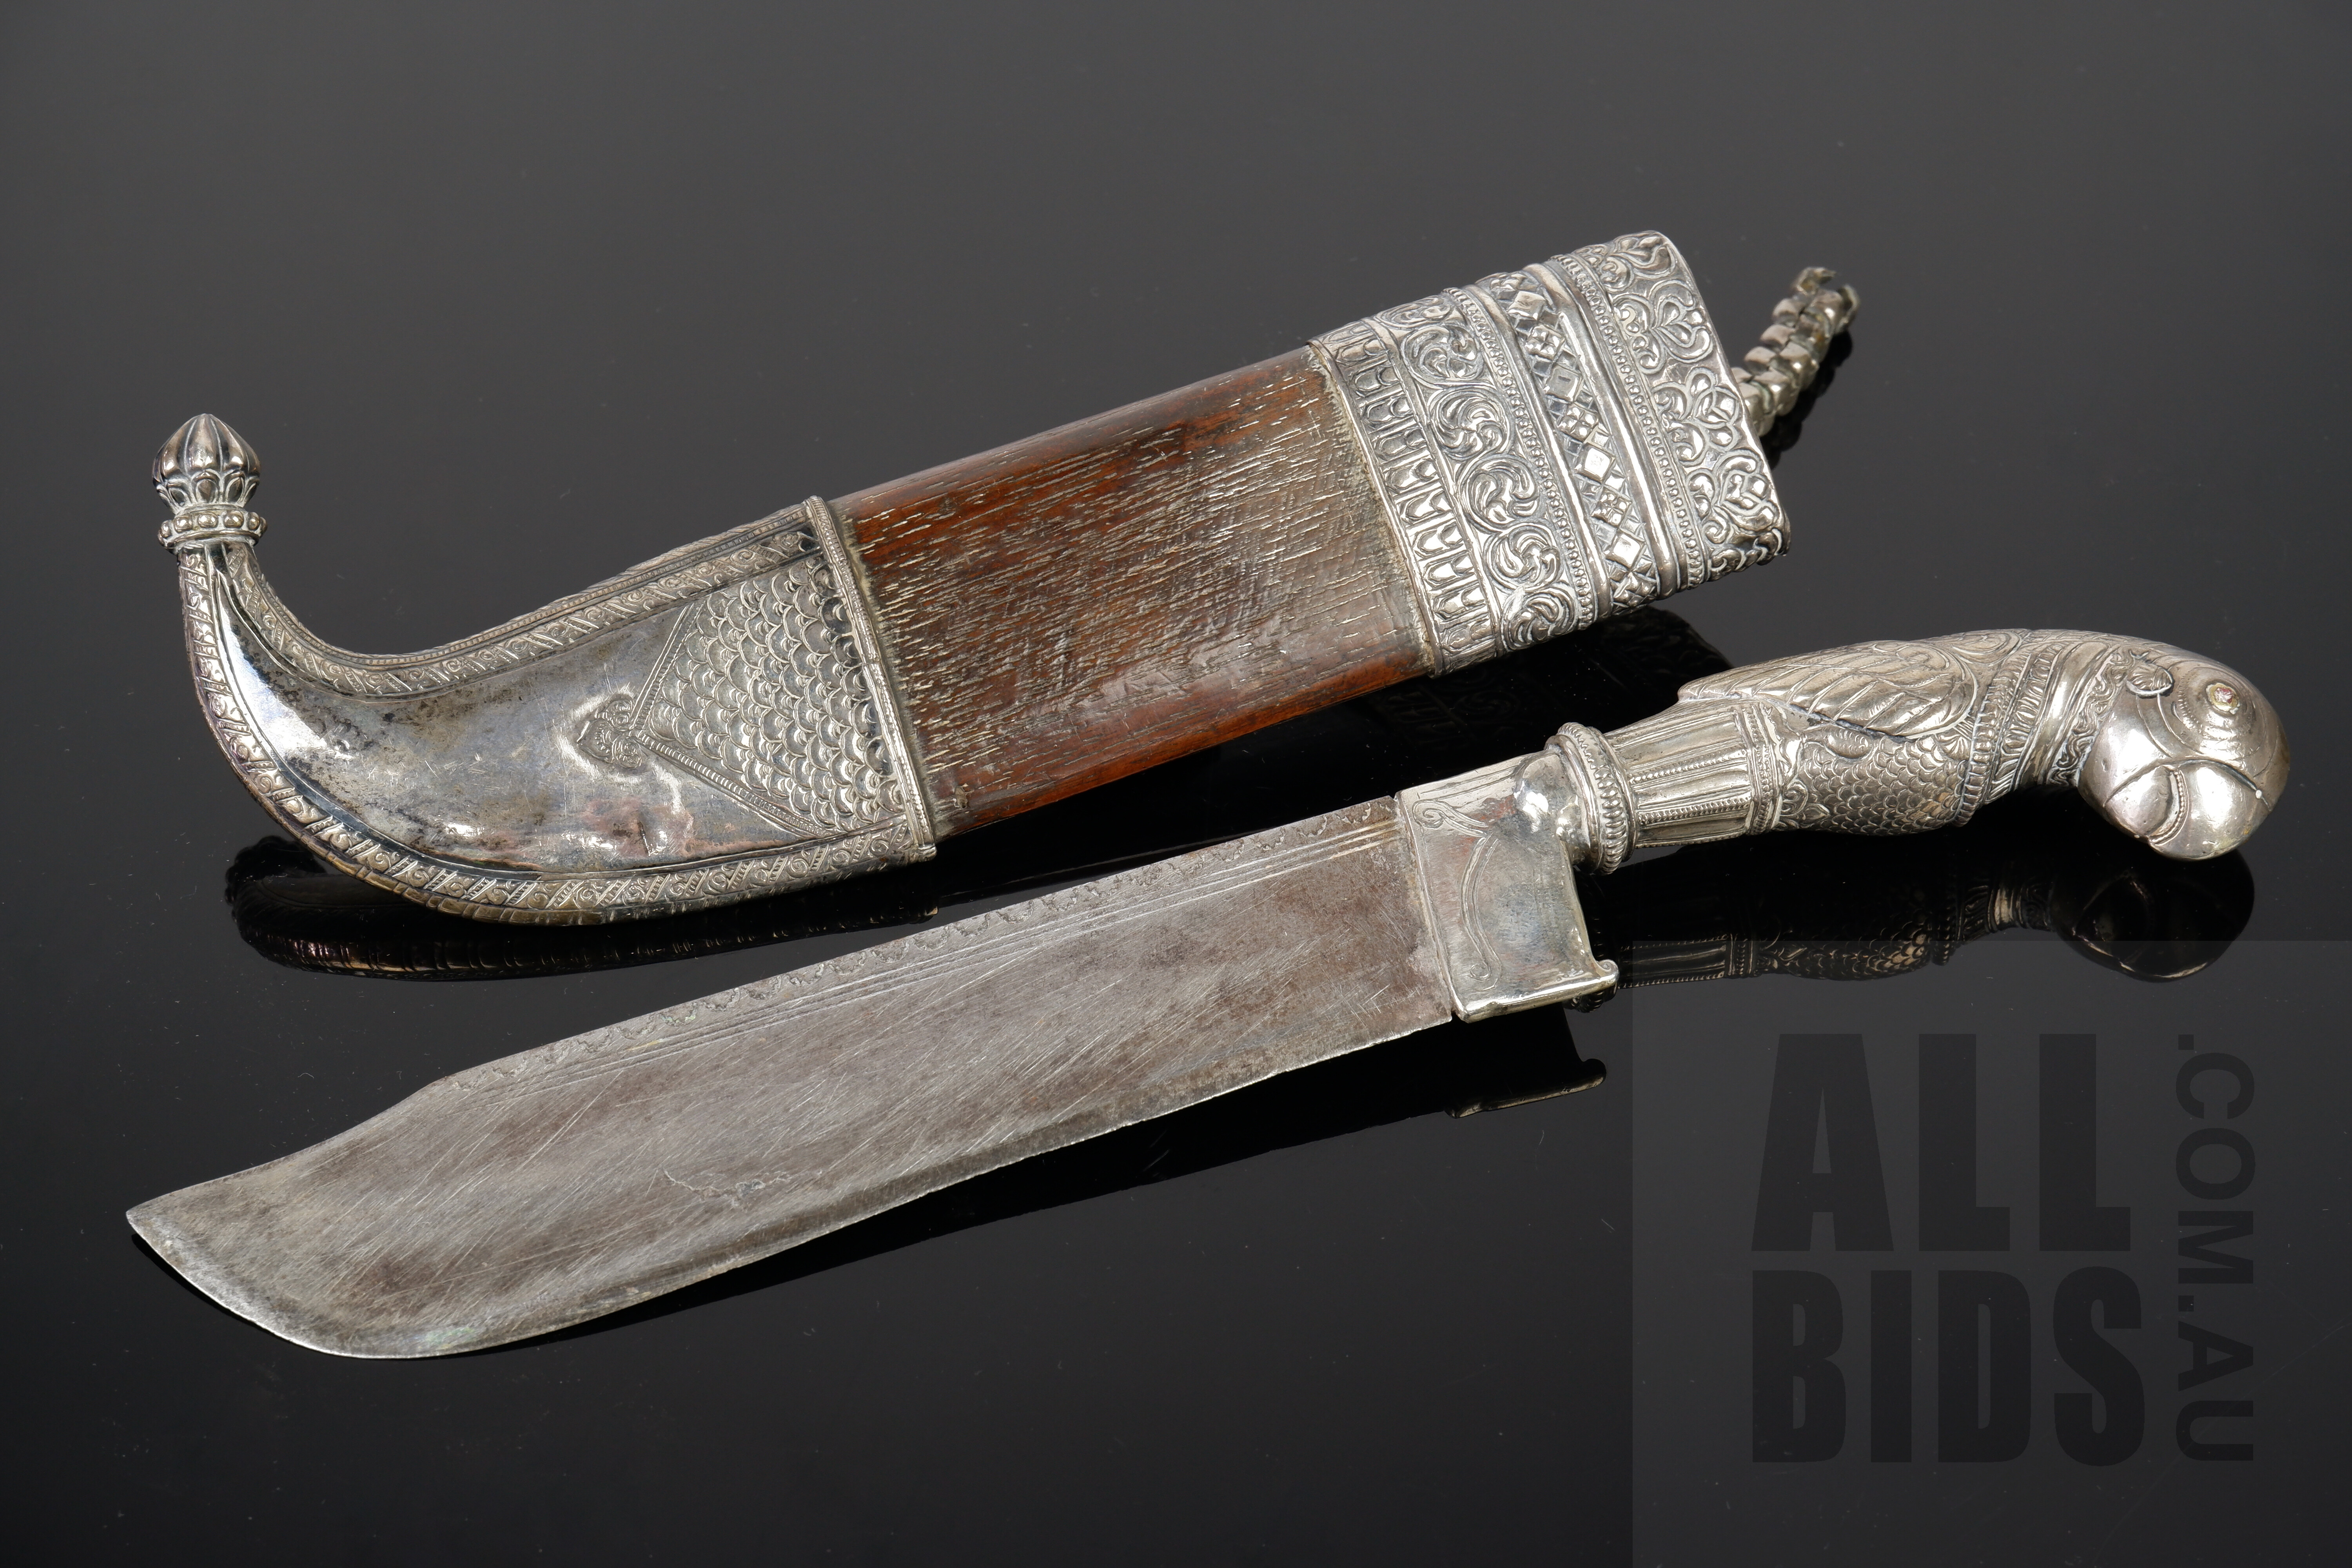 'Antique Silver and Hardwood Cased Knife with Parrot Head Handle'